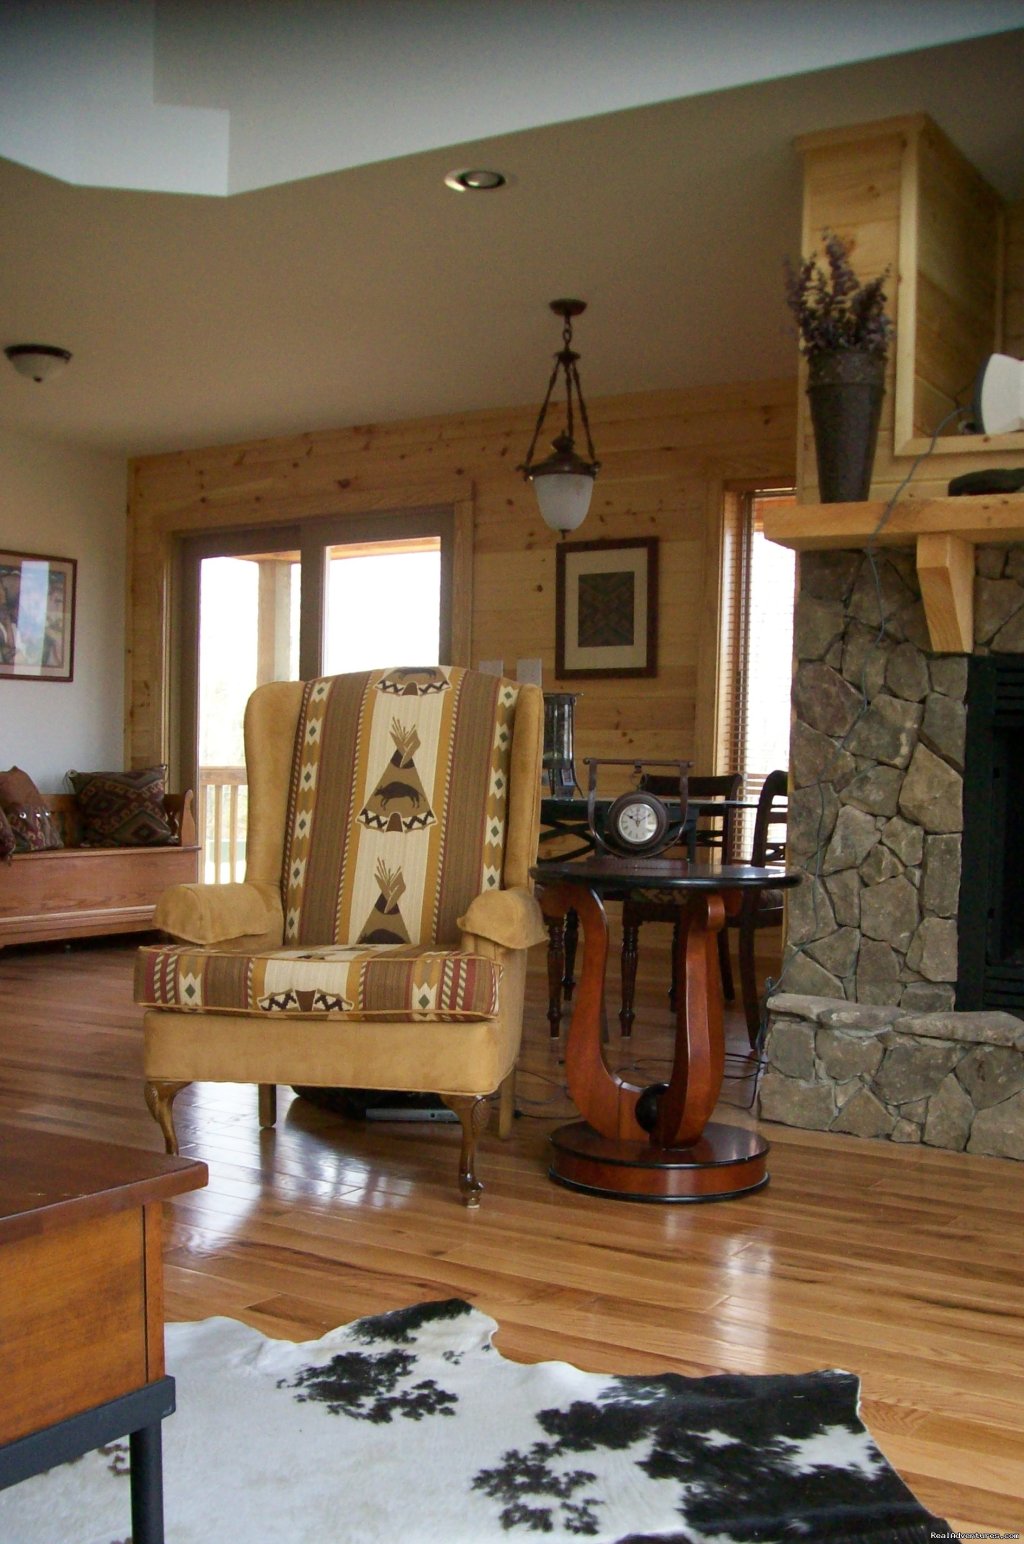 Relax next to the fireplace | Cabin retreat off the Blue Ridge Parkway | Image #5/8 | 